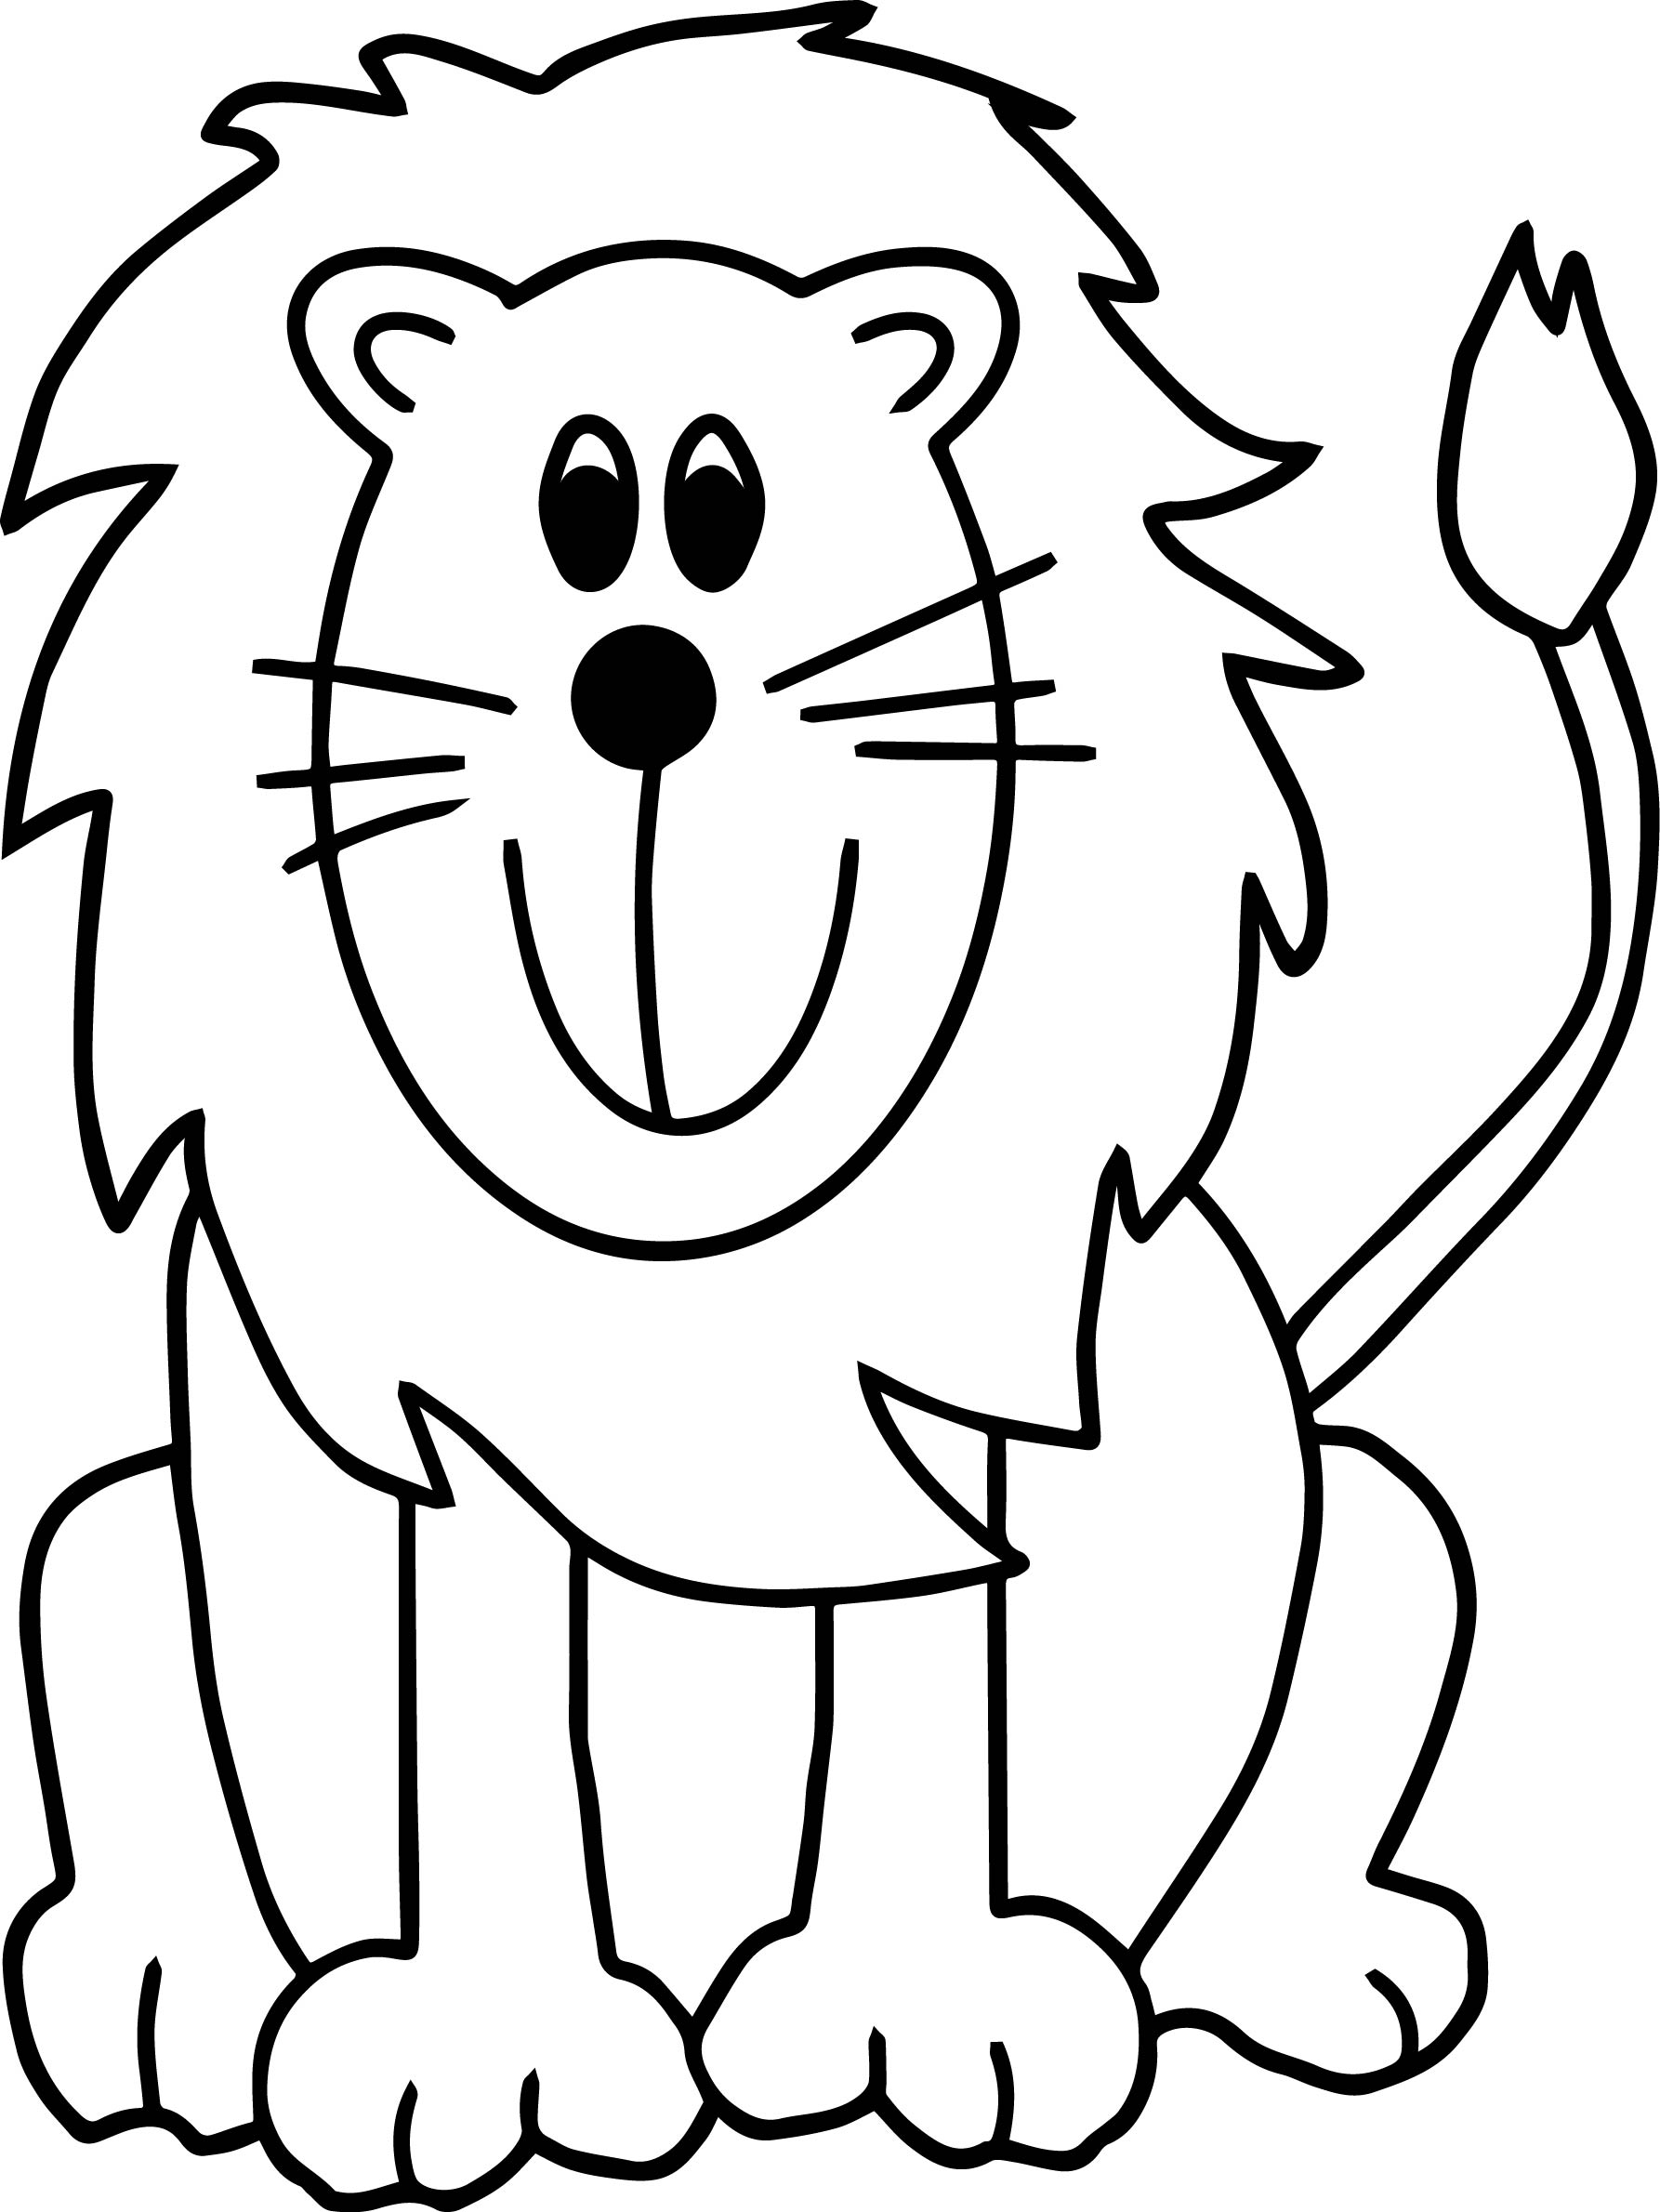 Zookeeper Coloring Page at Free printable colorings